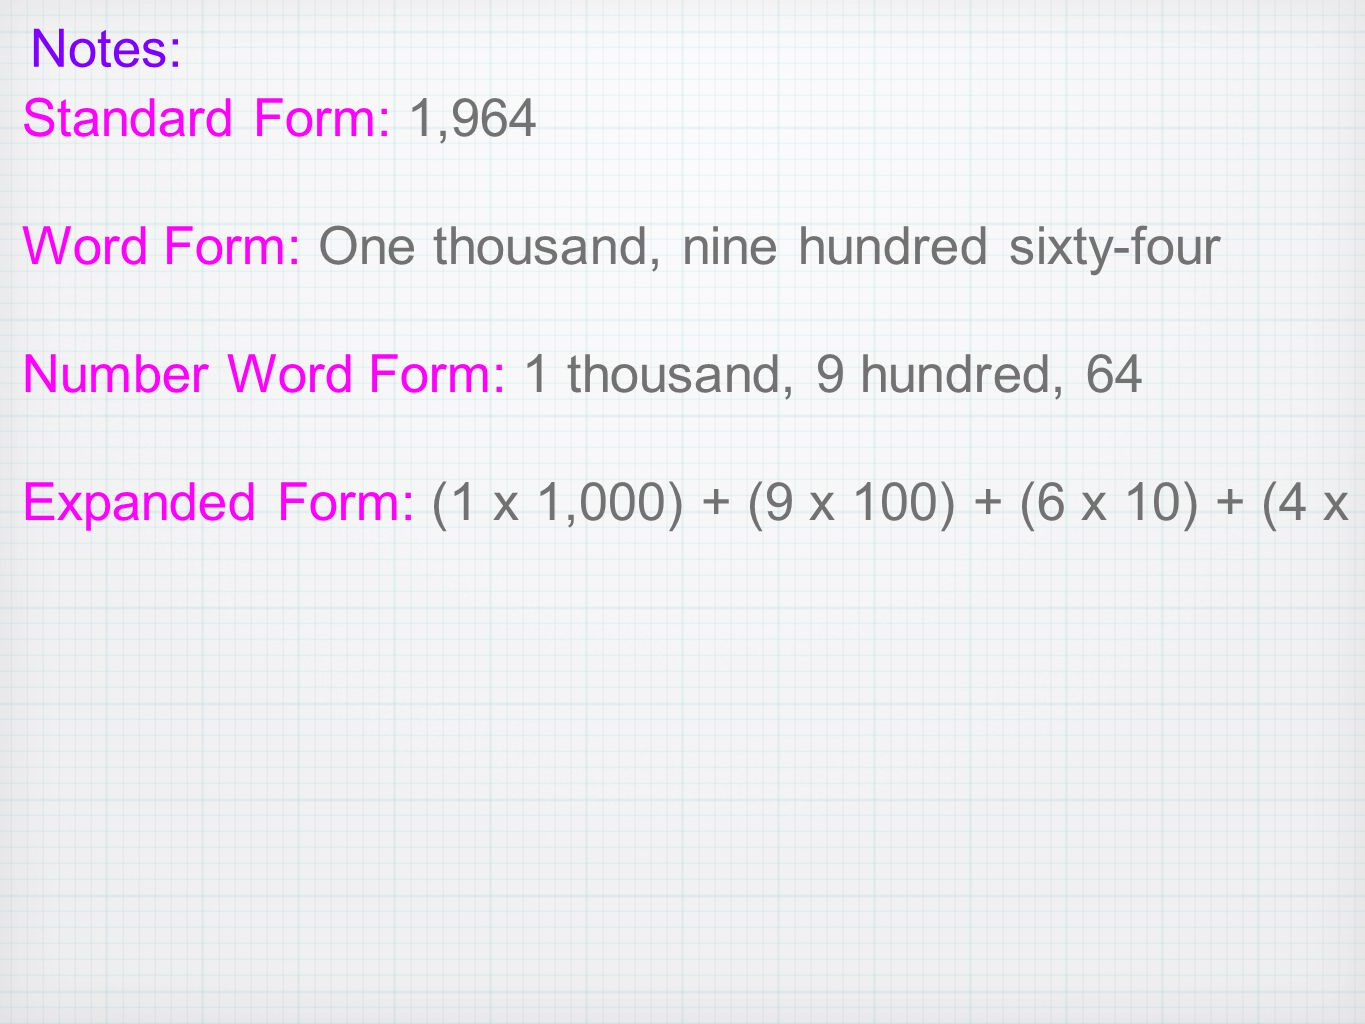 Notes: Standard Form: 1,964. Word Form: One thousand, nine hundred sixty-four. Number Word Form: 1 thousand, 9 hundred, 64.